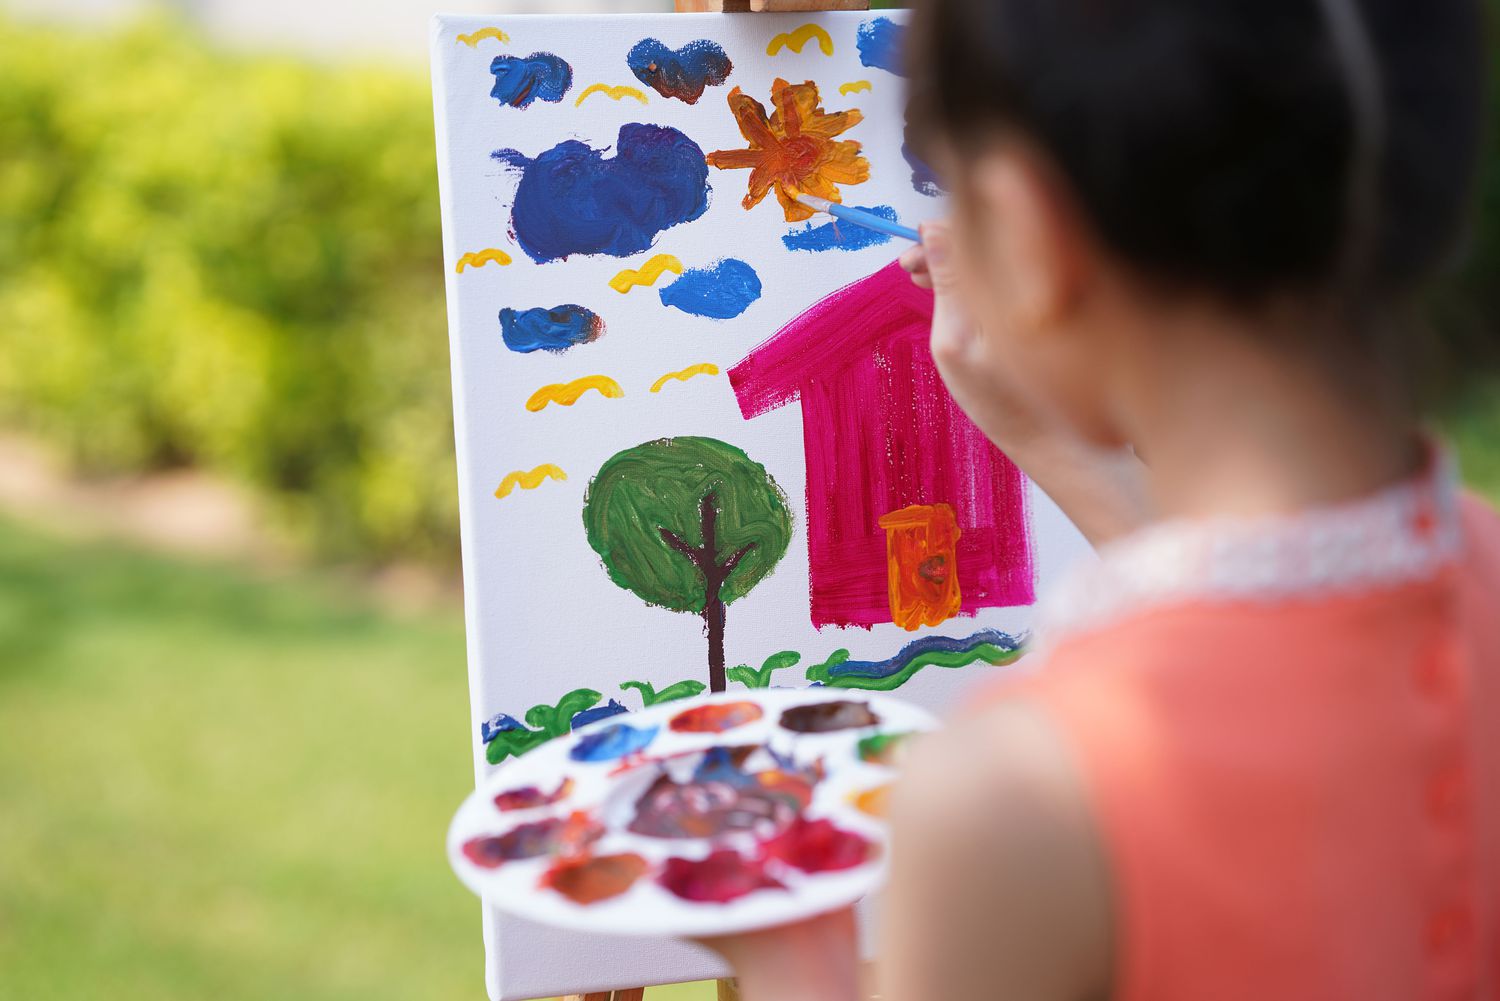 Some Ideas to Make Displays of Your Kids’ Artworks